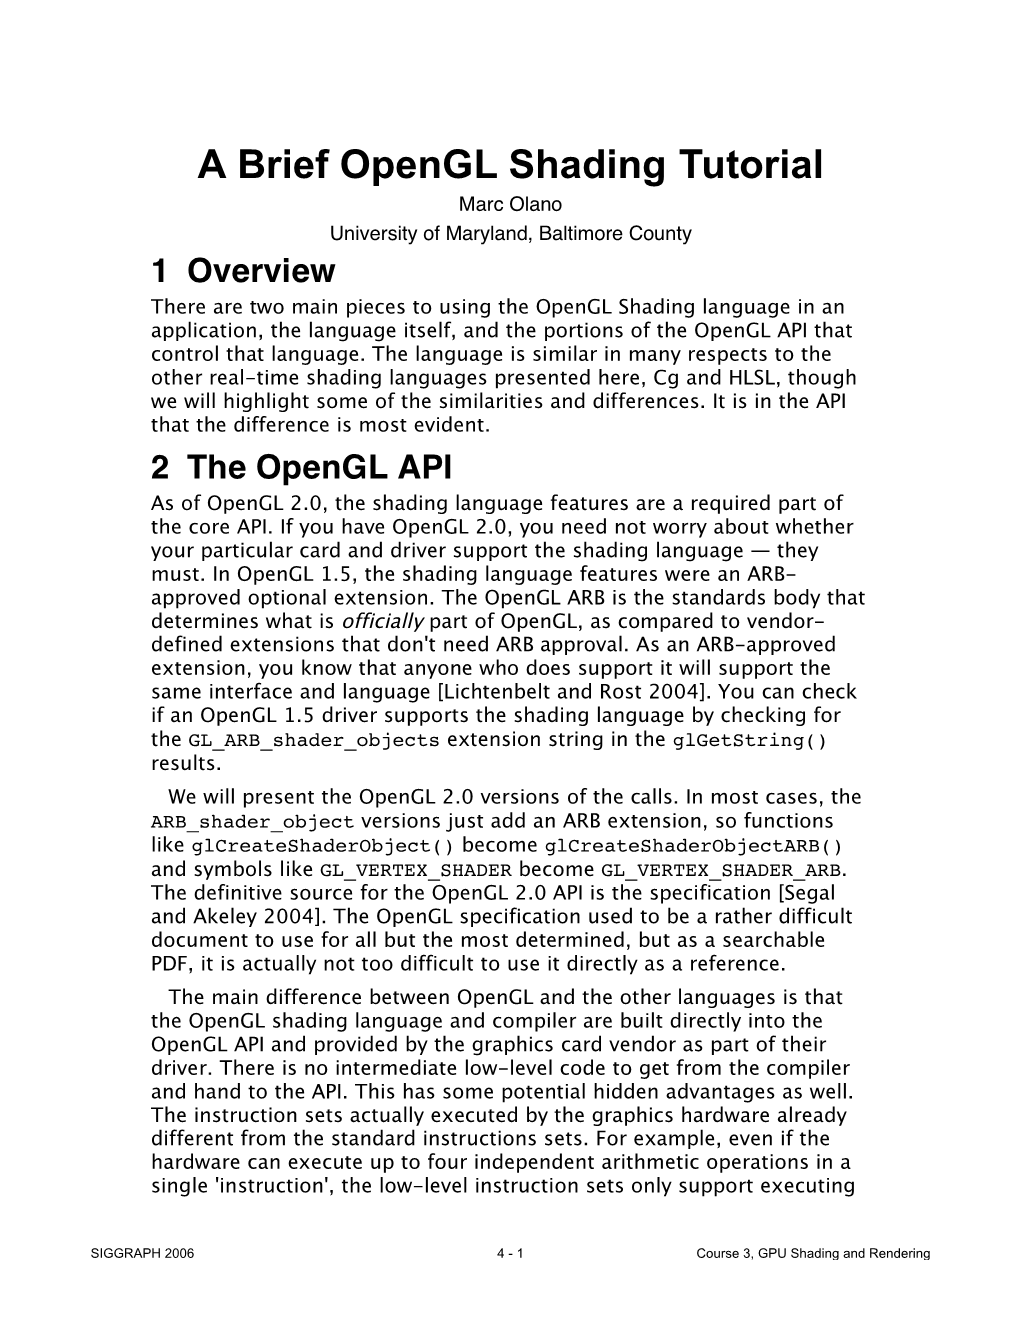 Opengl Shading Language in an Application, the Language Itself, and the Portions of the Opengl API That Control That Language